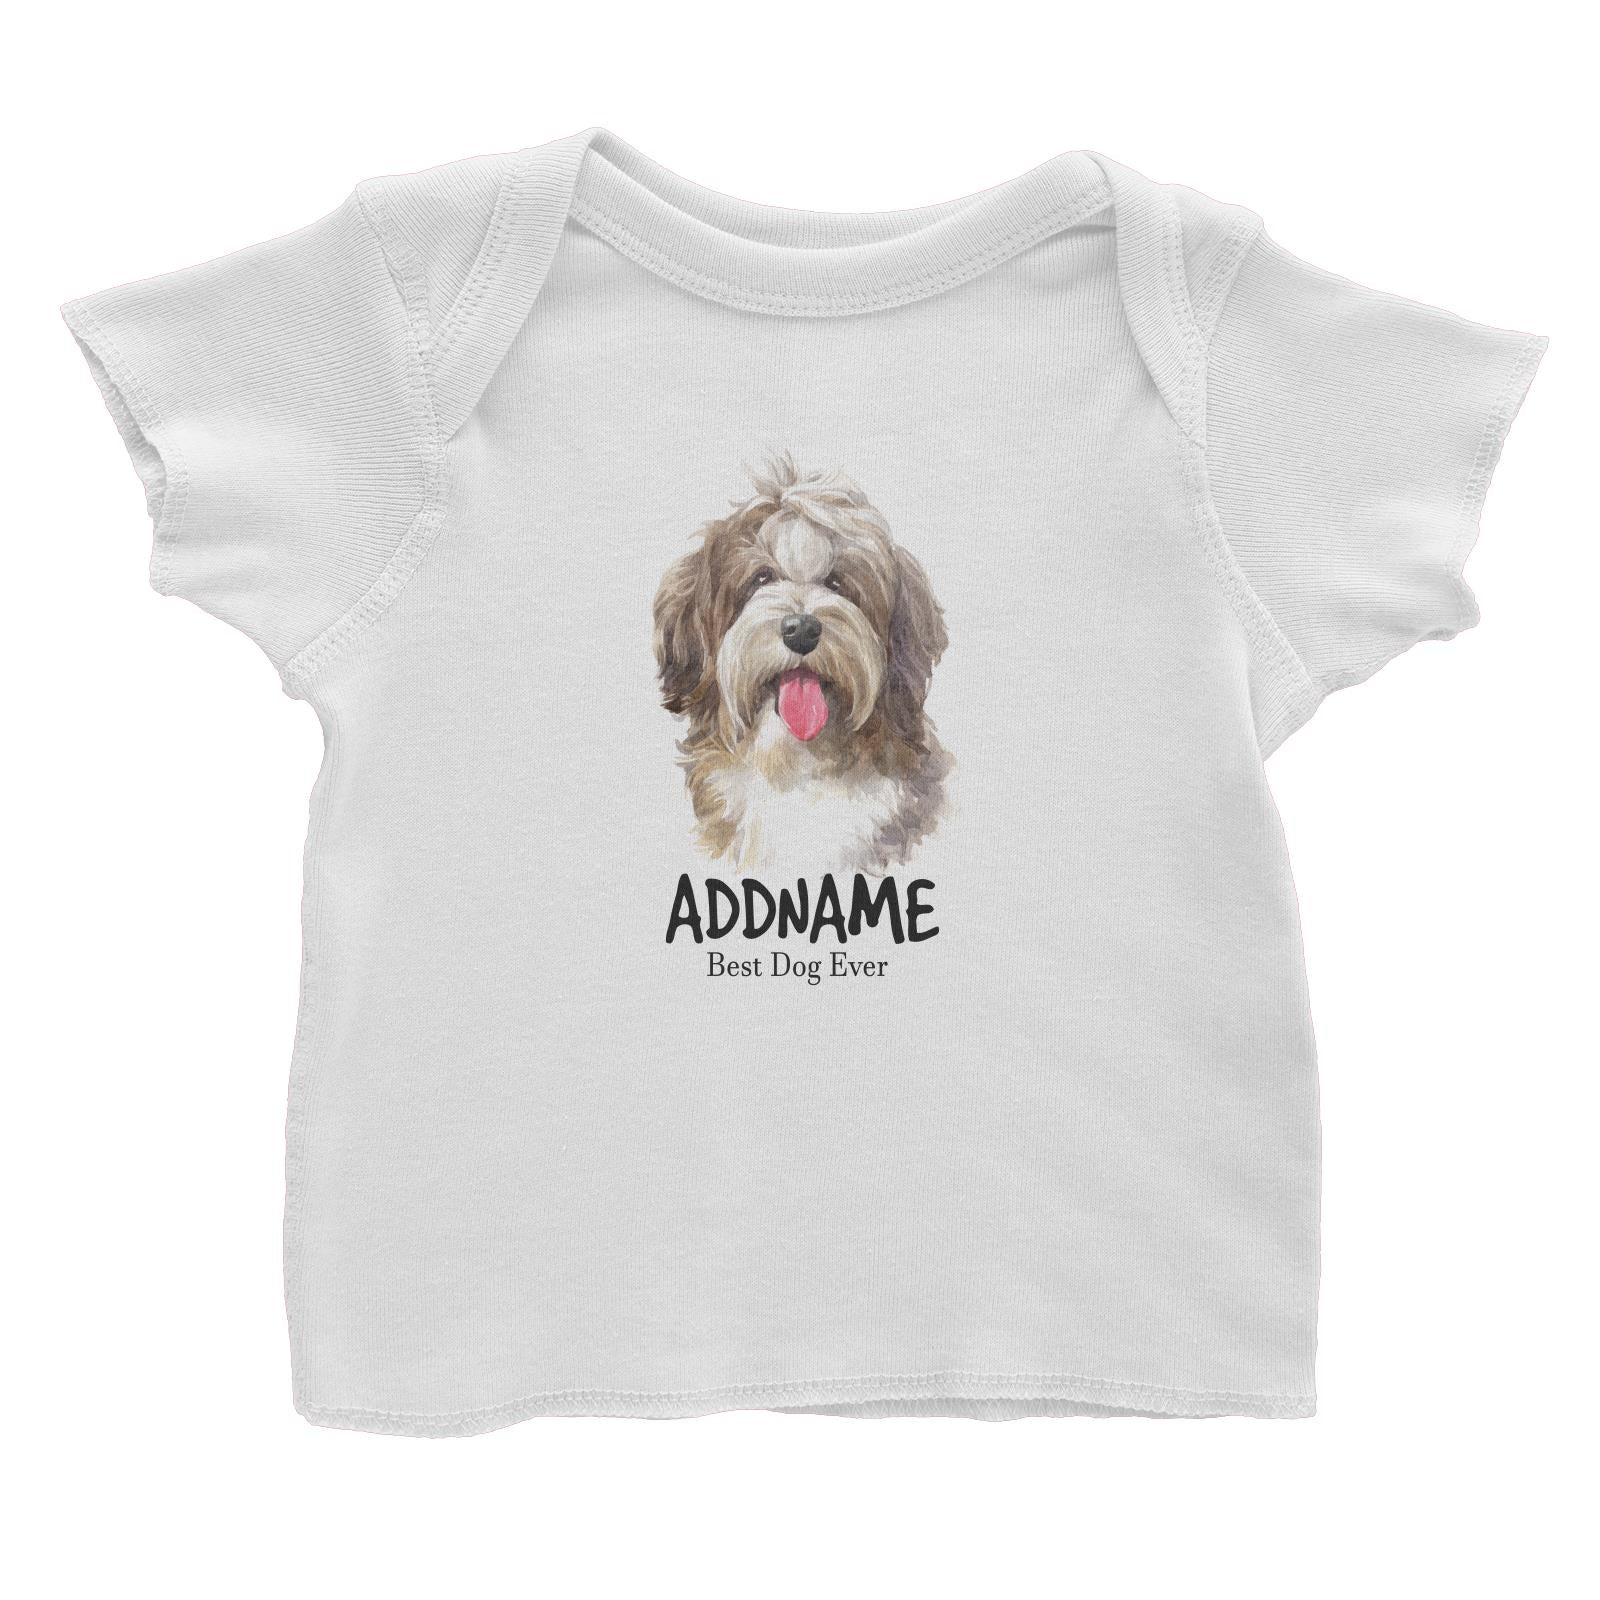 Watercolor Dog Shaggy Havanese Best Dog Ever Addname Baby T-Shirt